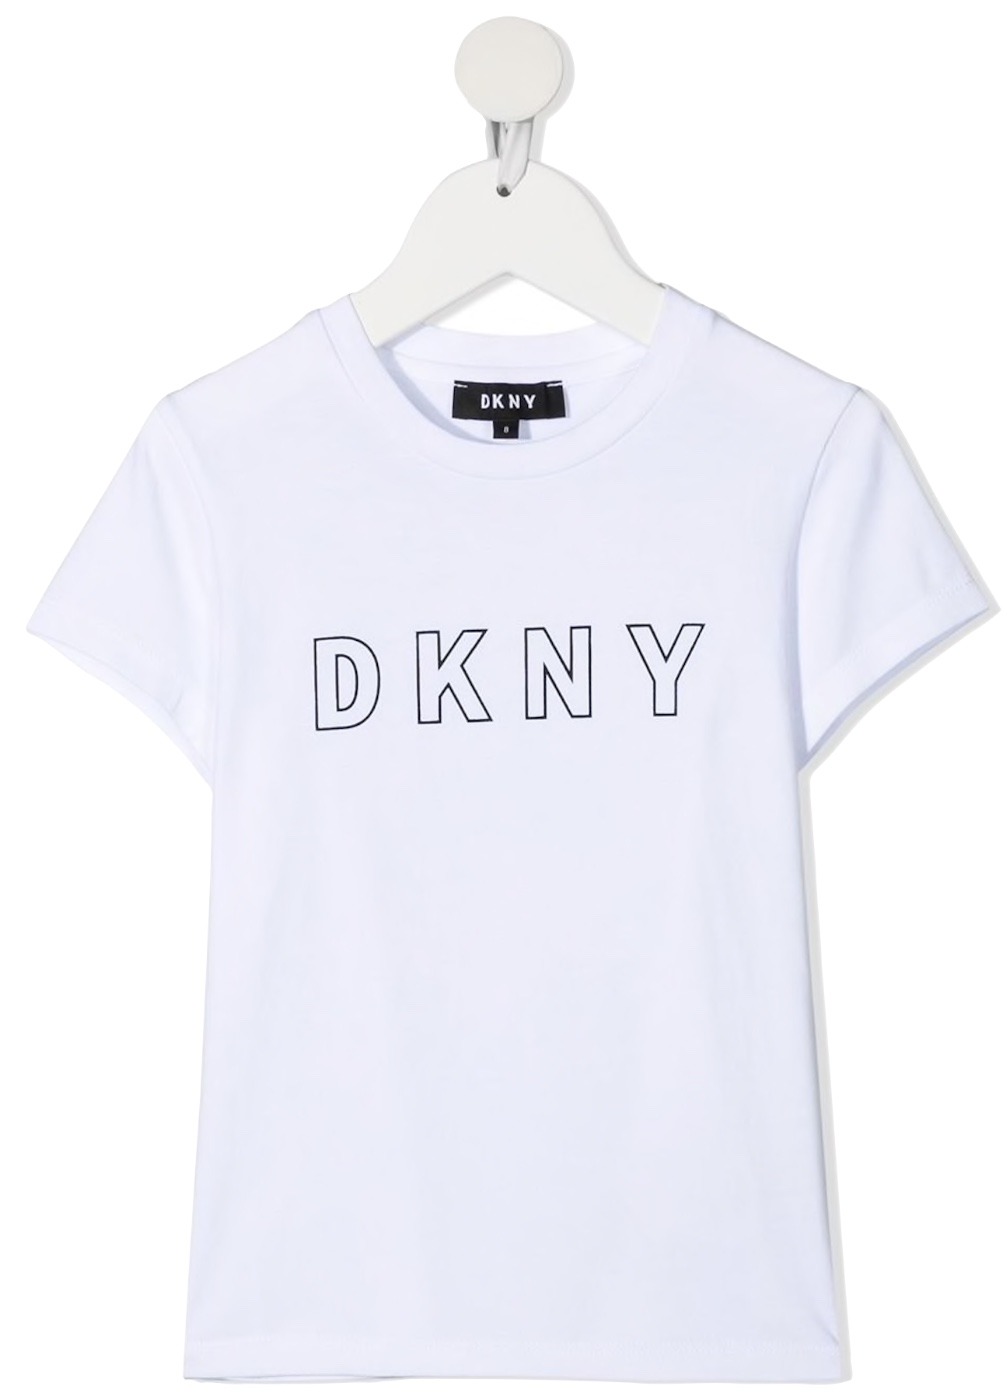 Featured image for “DKNY T-SHIRT GIROCOLLO”